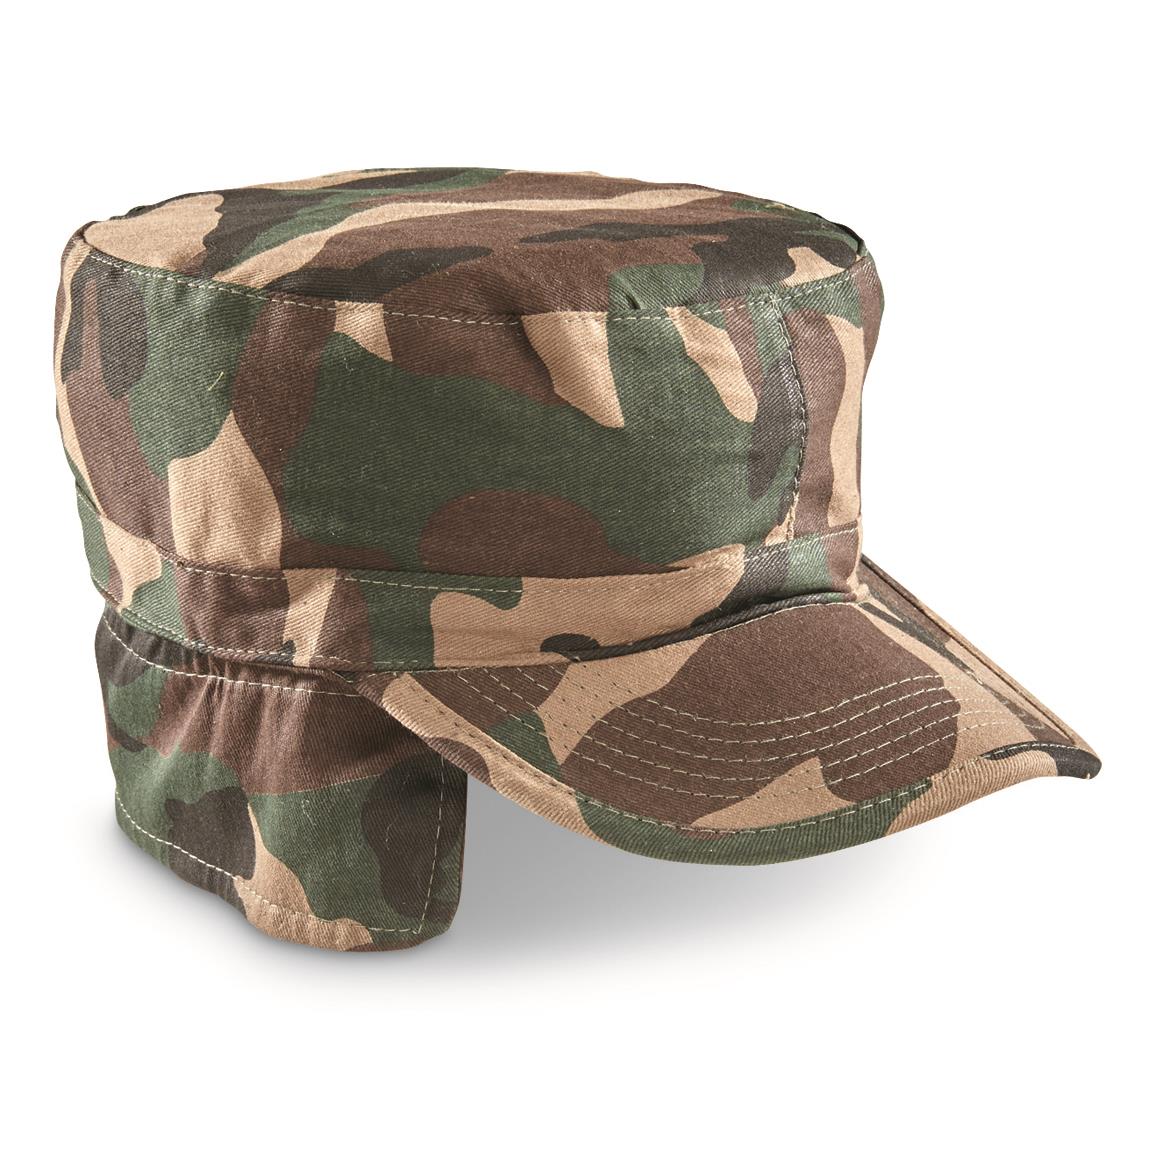 Mil-Tec Military Style Field Caps, 4 Pack - 660532, Military Hats